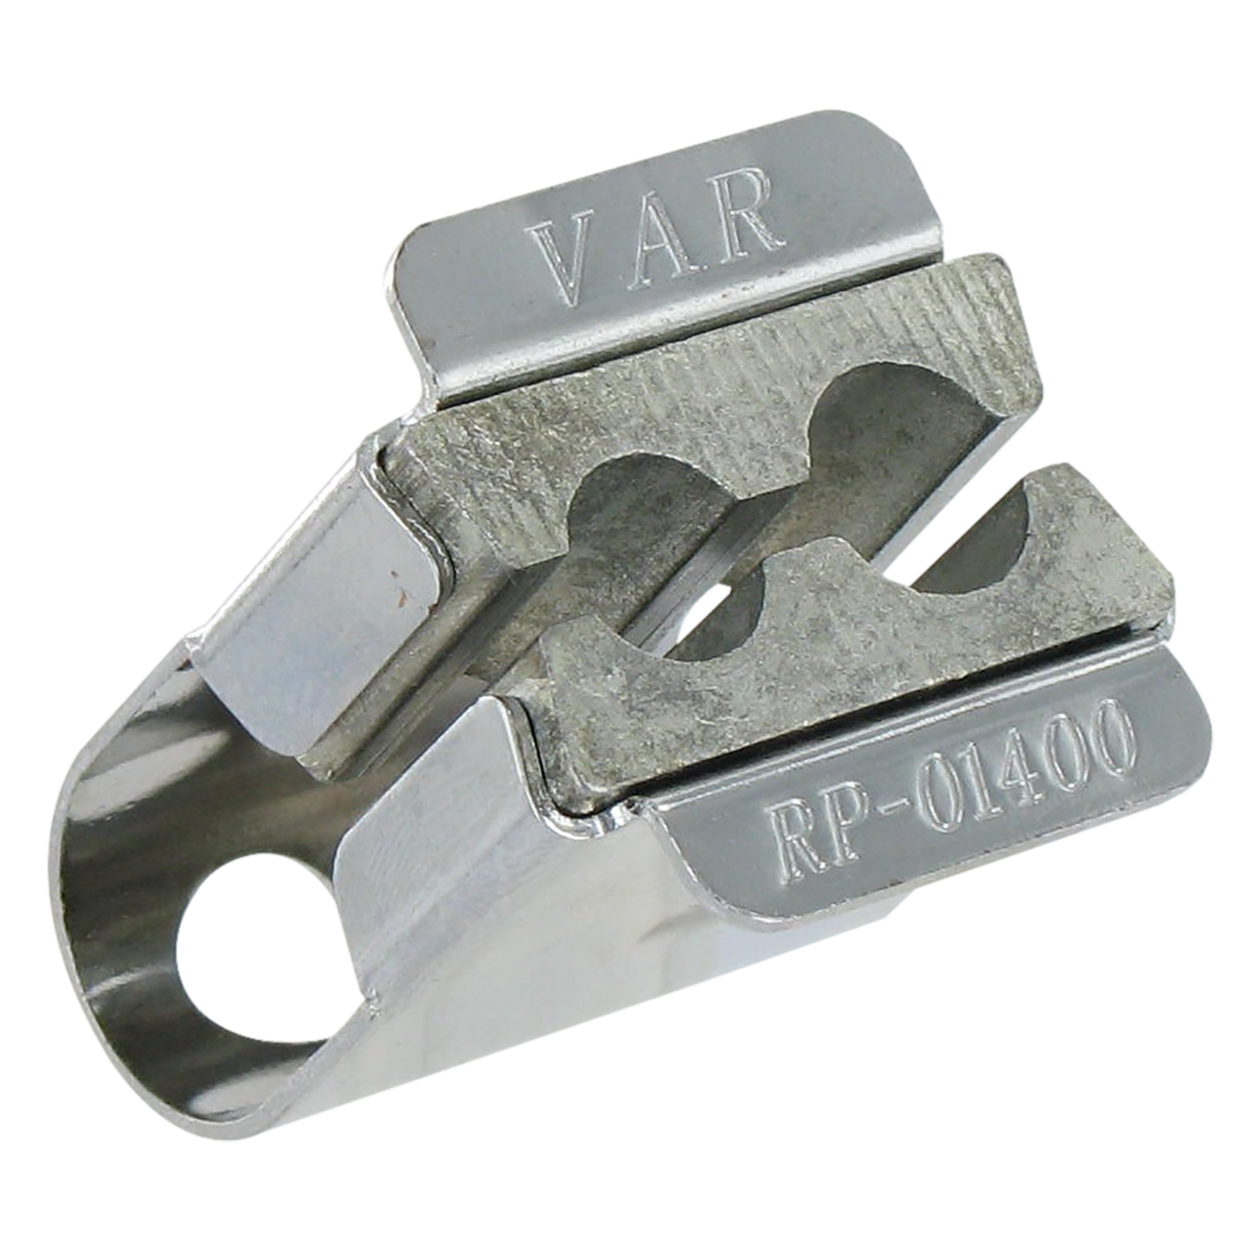 Axle vise for front and rear hubs